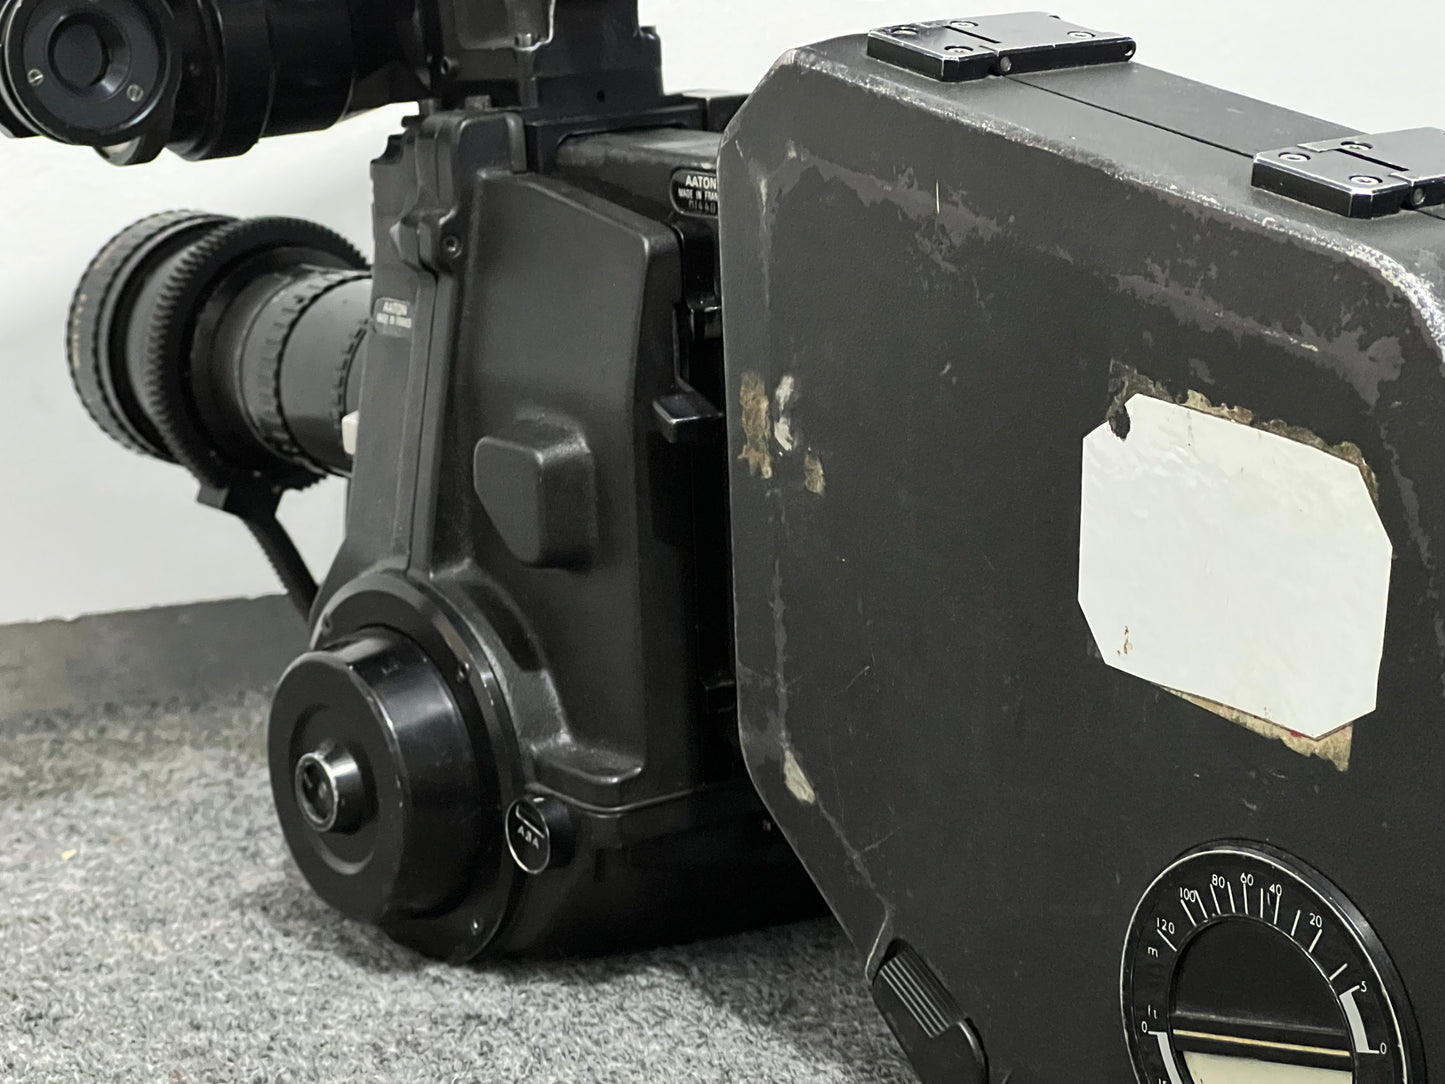 Aaton LTR 32 16mm movie camera with lens